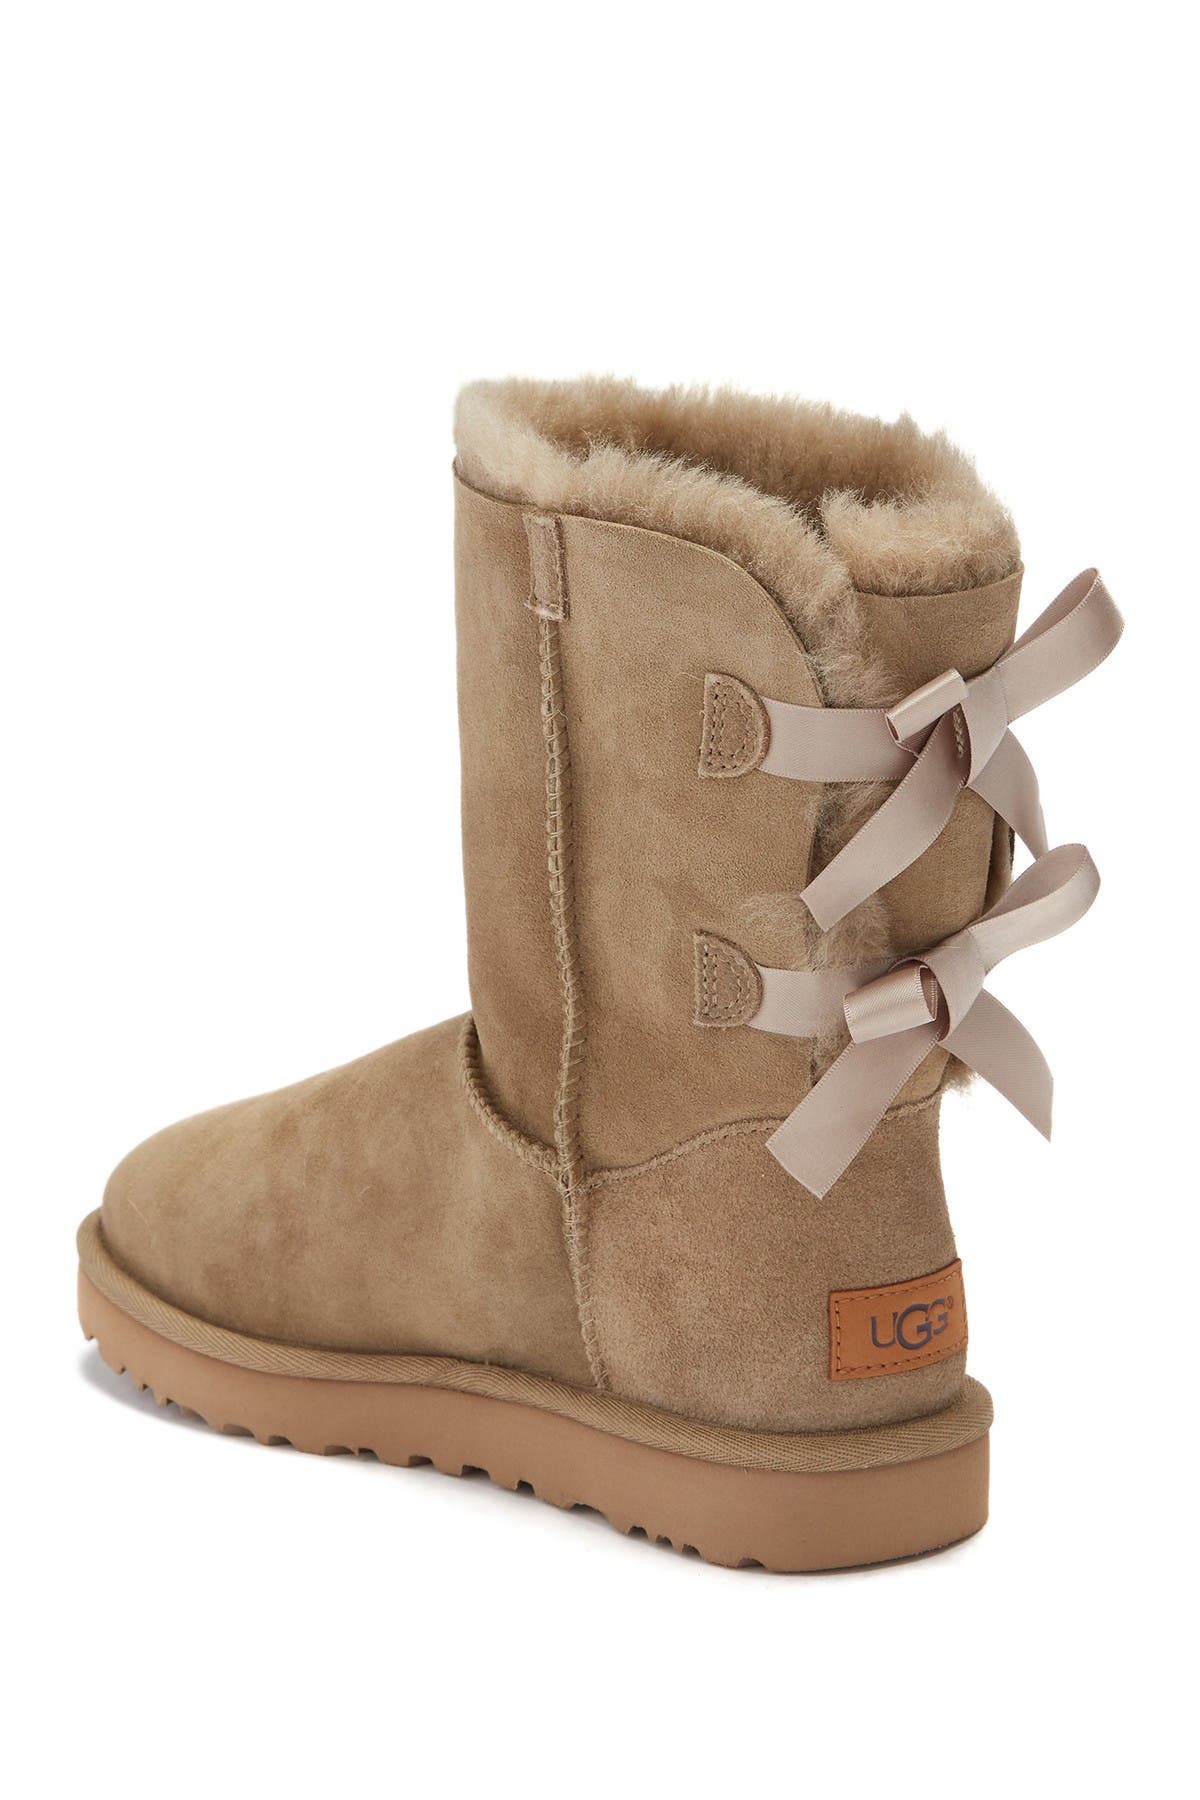 bailey bow uggs nordstrom rack